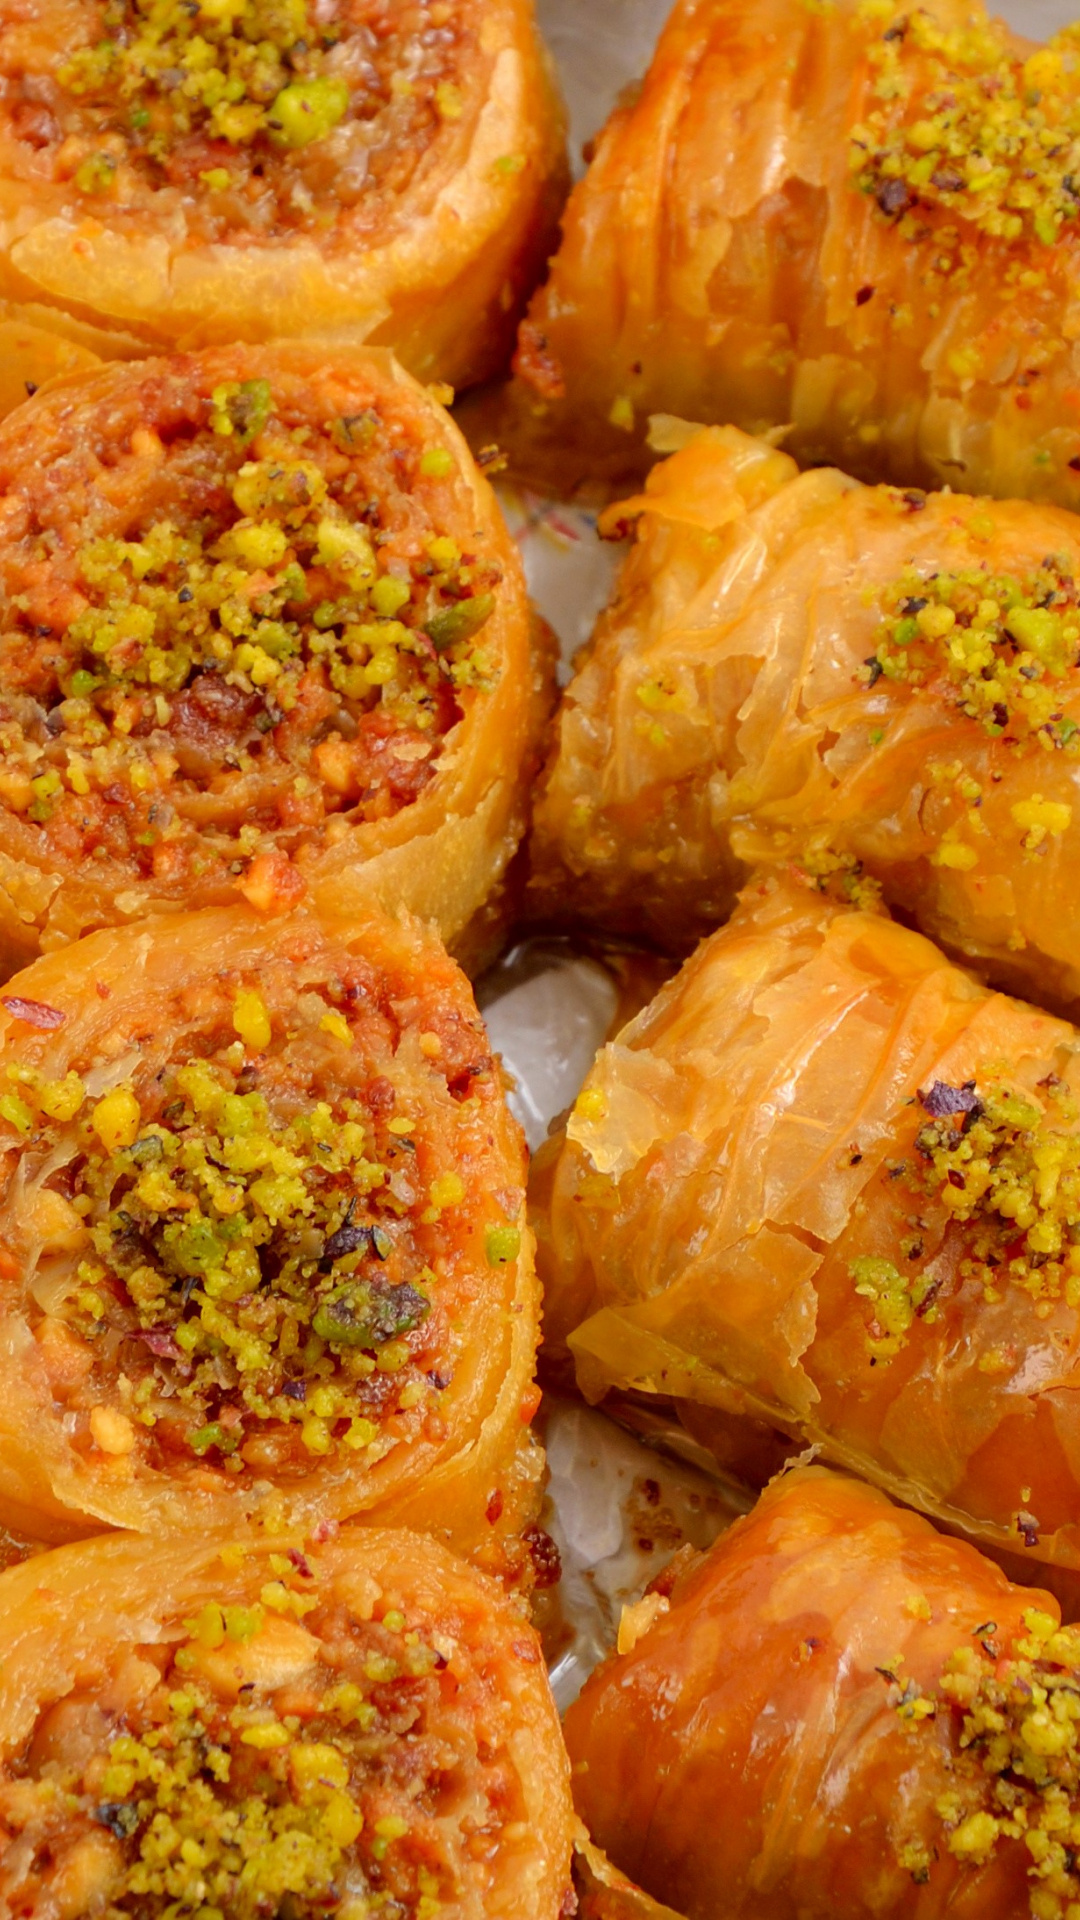 Baklava: The number of layers ranges from 20 to 40 layers. 1080x1920 Full HD Background.